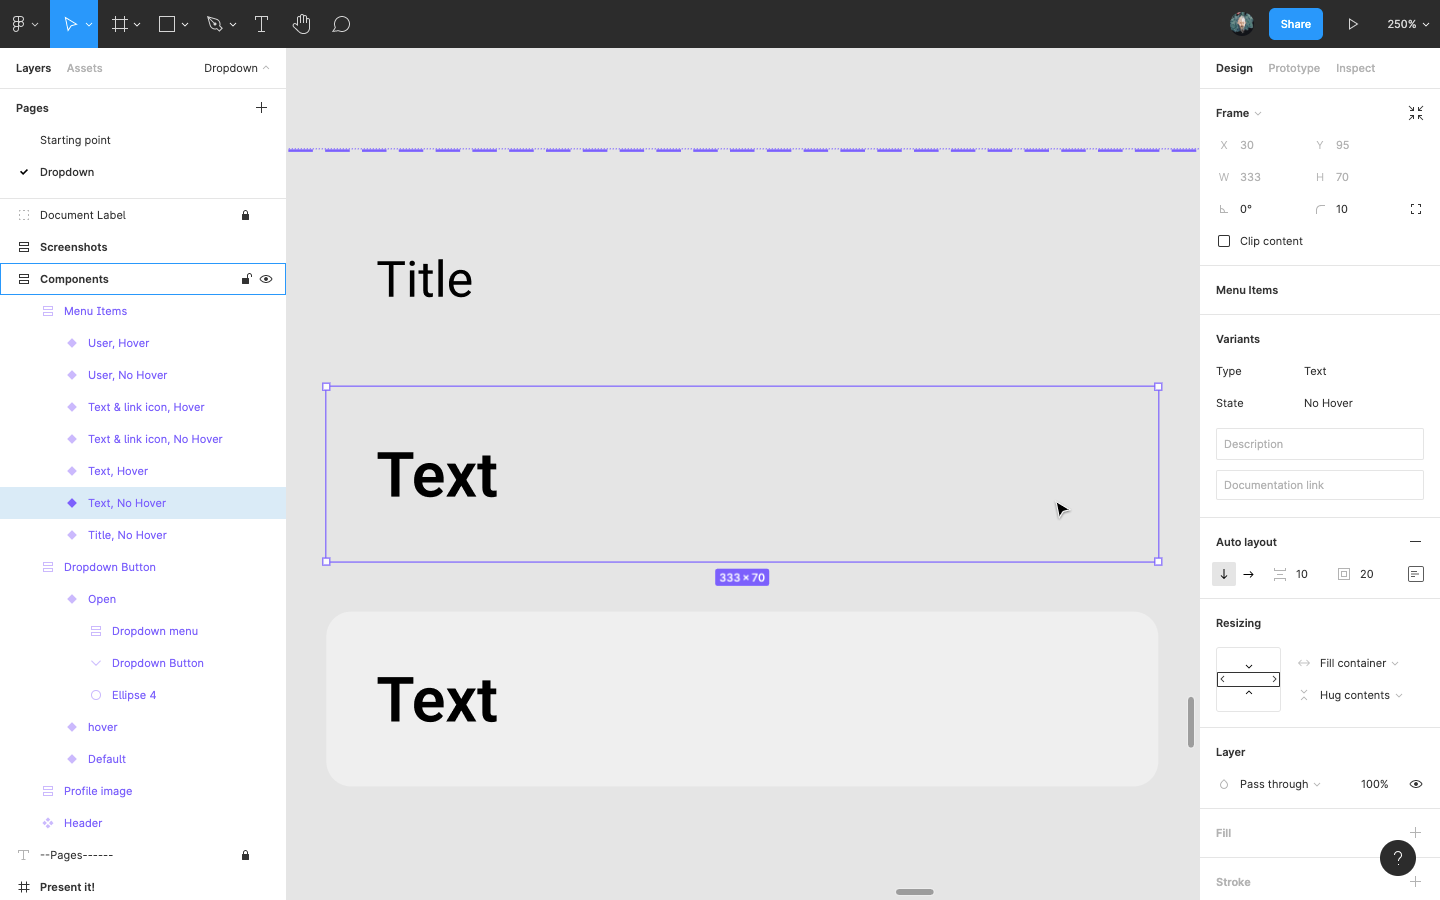 Add a text variant